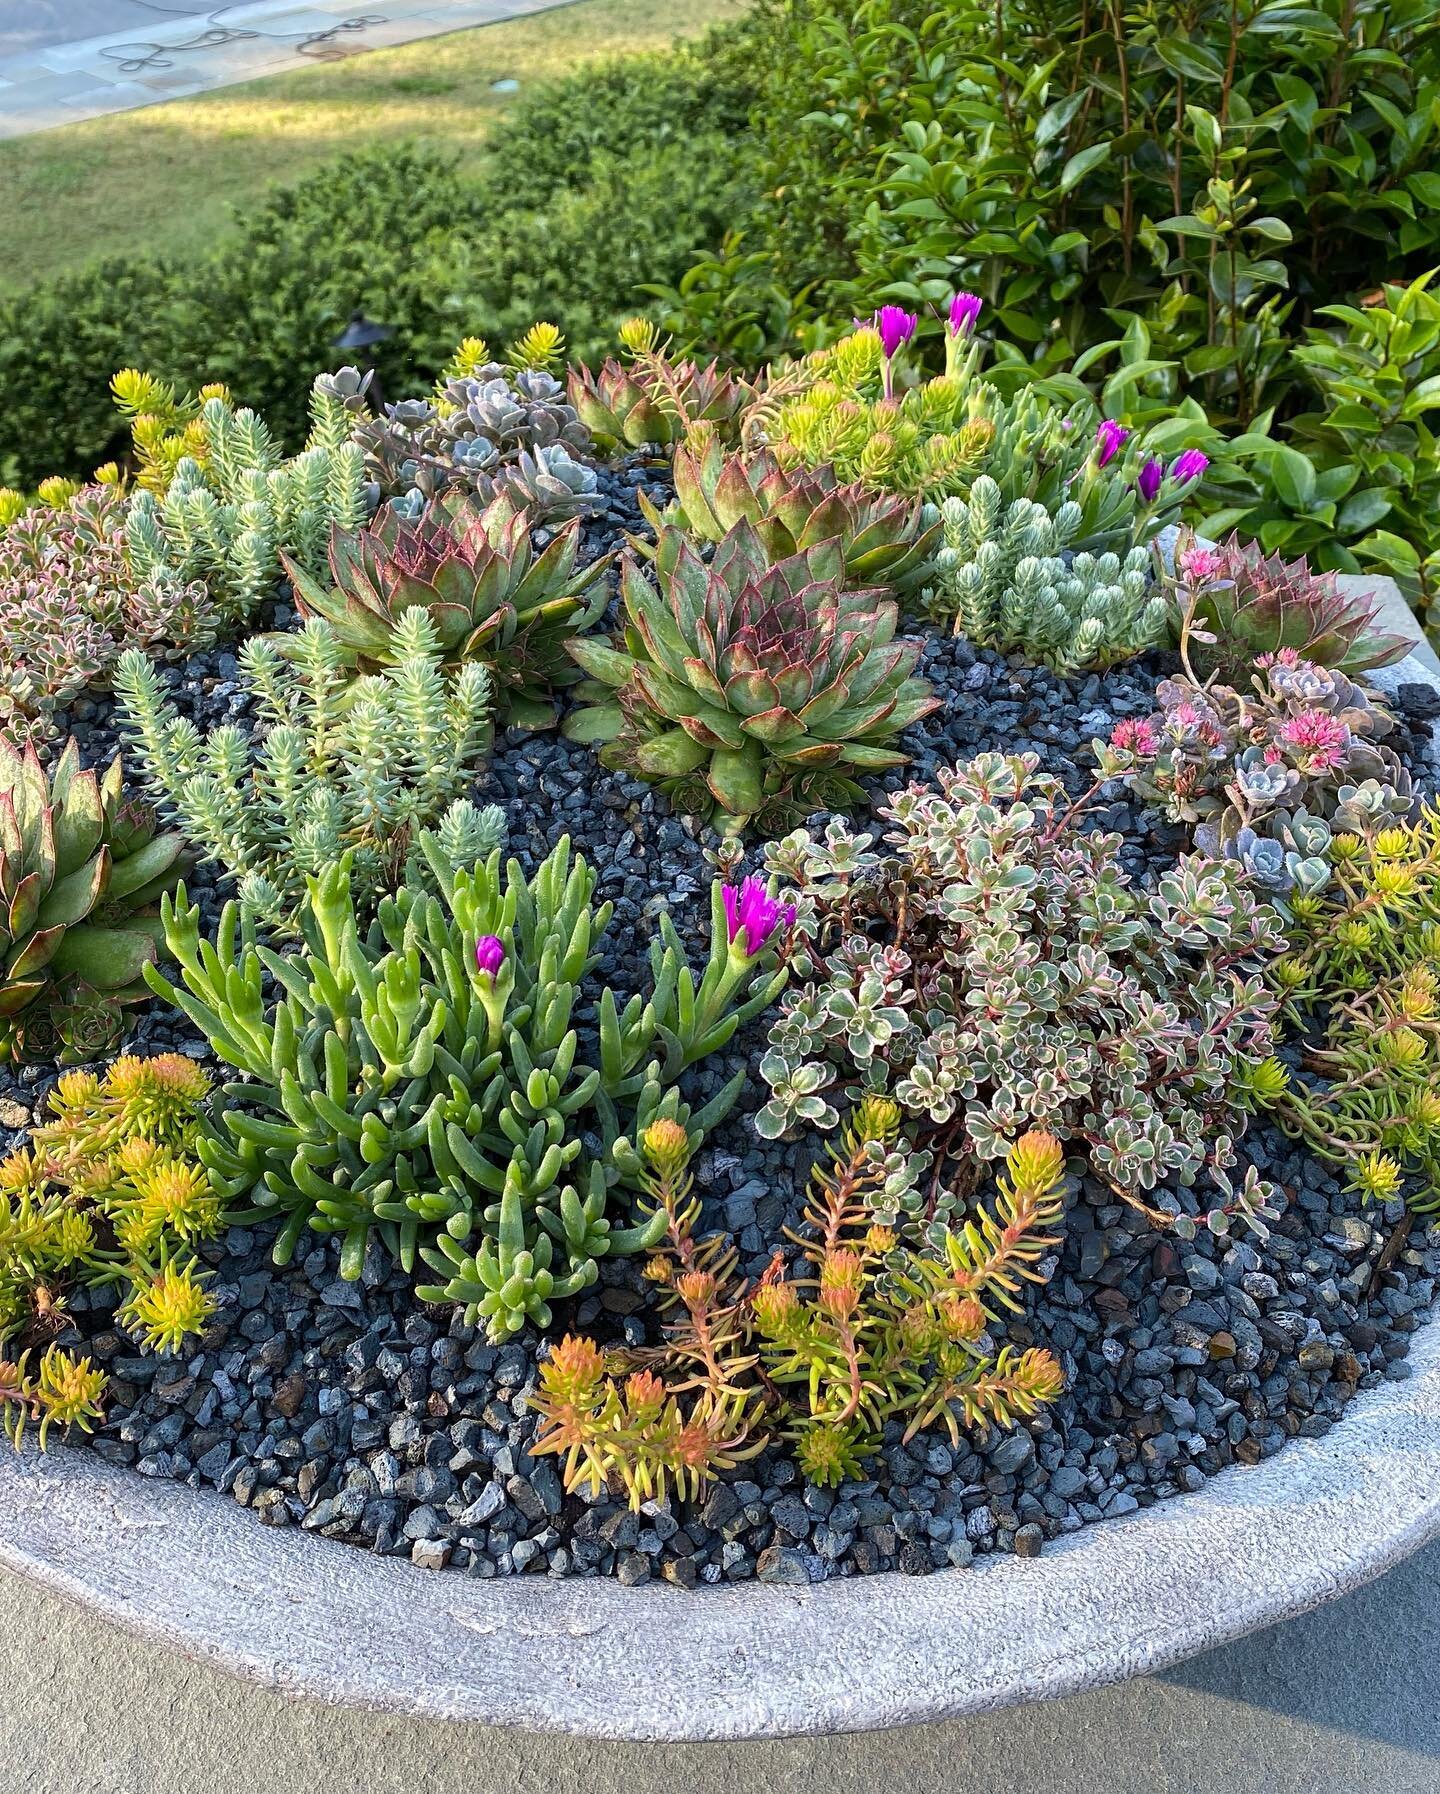 Recall our spring obsession with sedums?  Still growing strong in early October! Minimal extra watering and full baking sun.